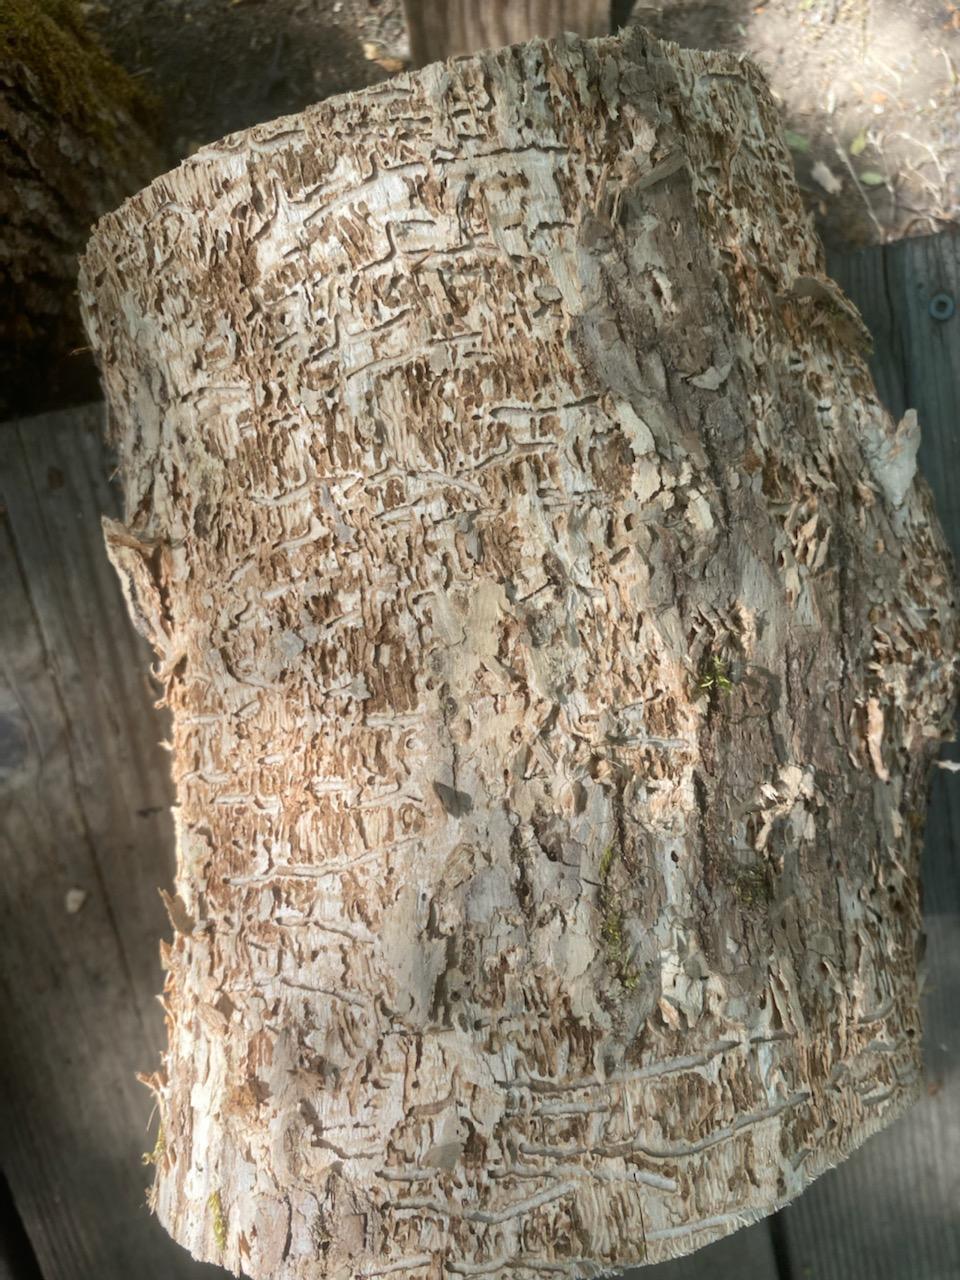 horizontal lines in section of tree trunk